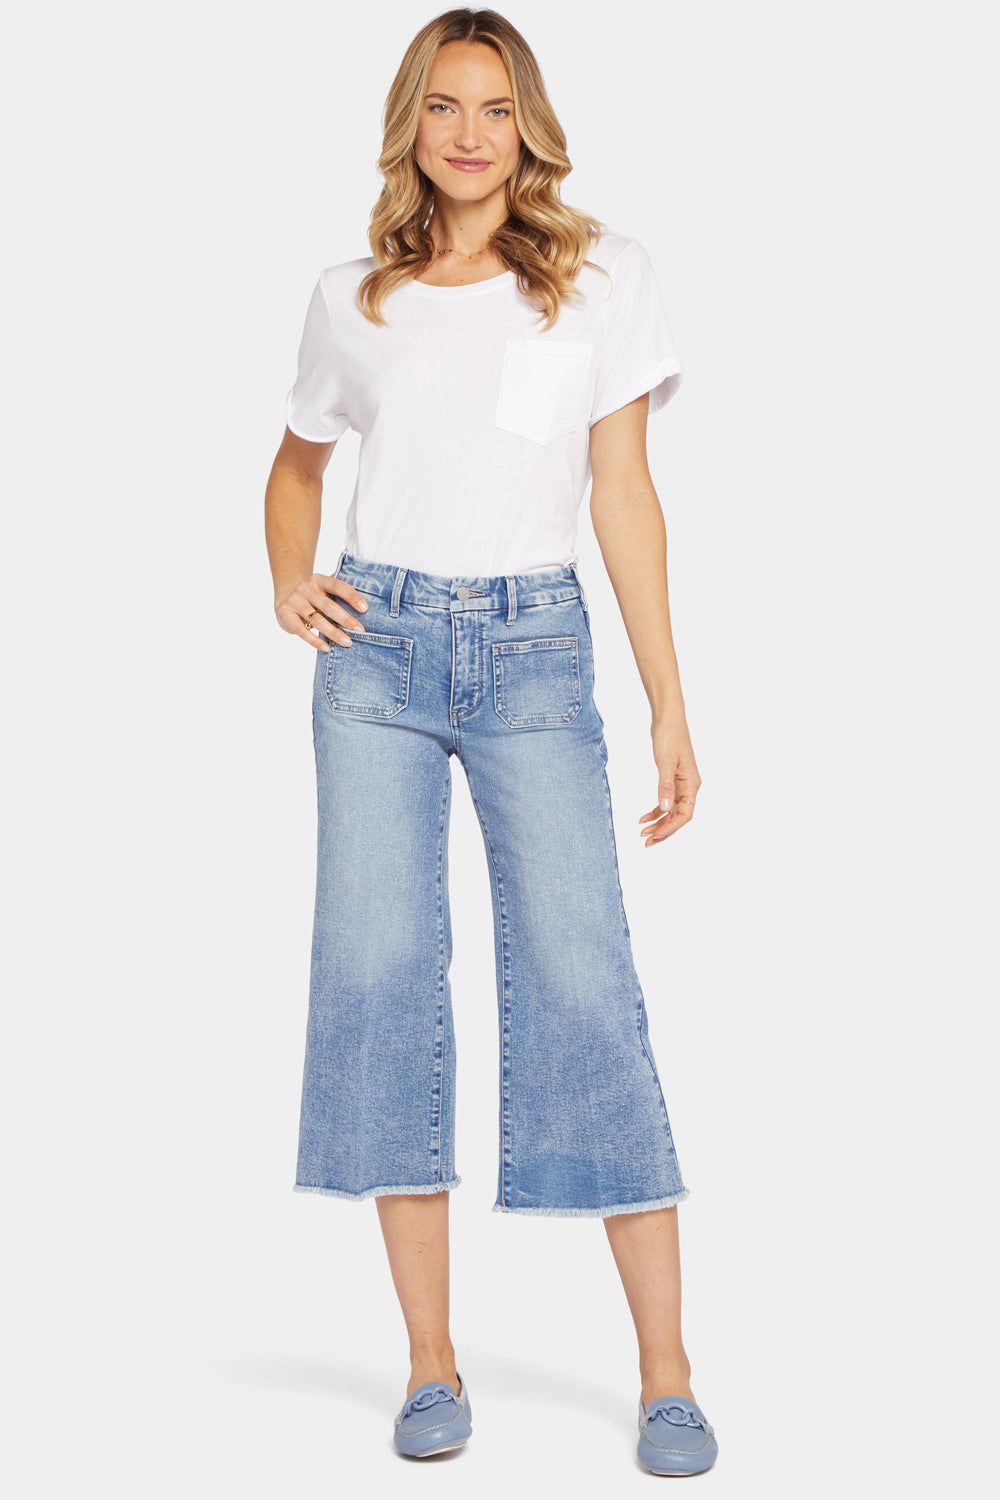 NYDJ Patchie Wide Leg Capri Jeans With Frayed Hems - Quinta